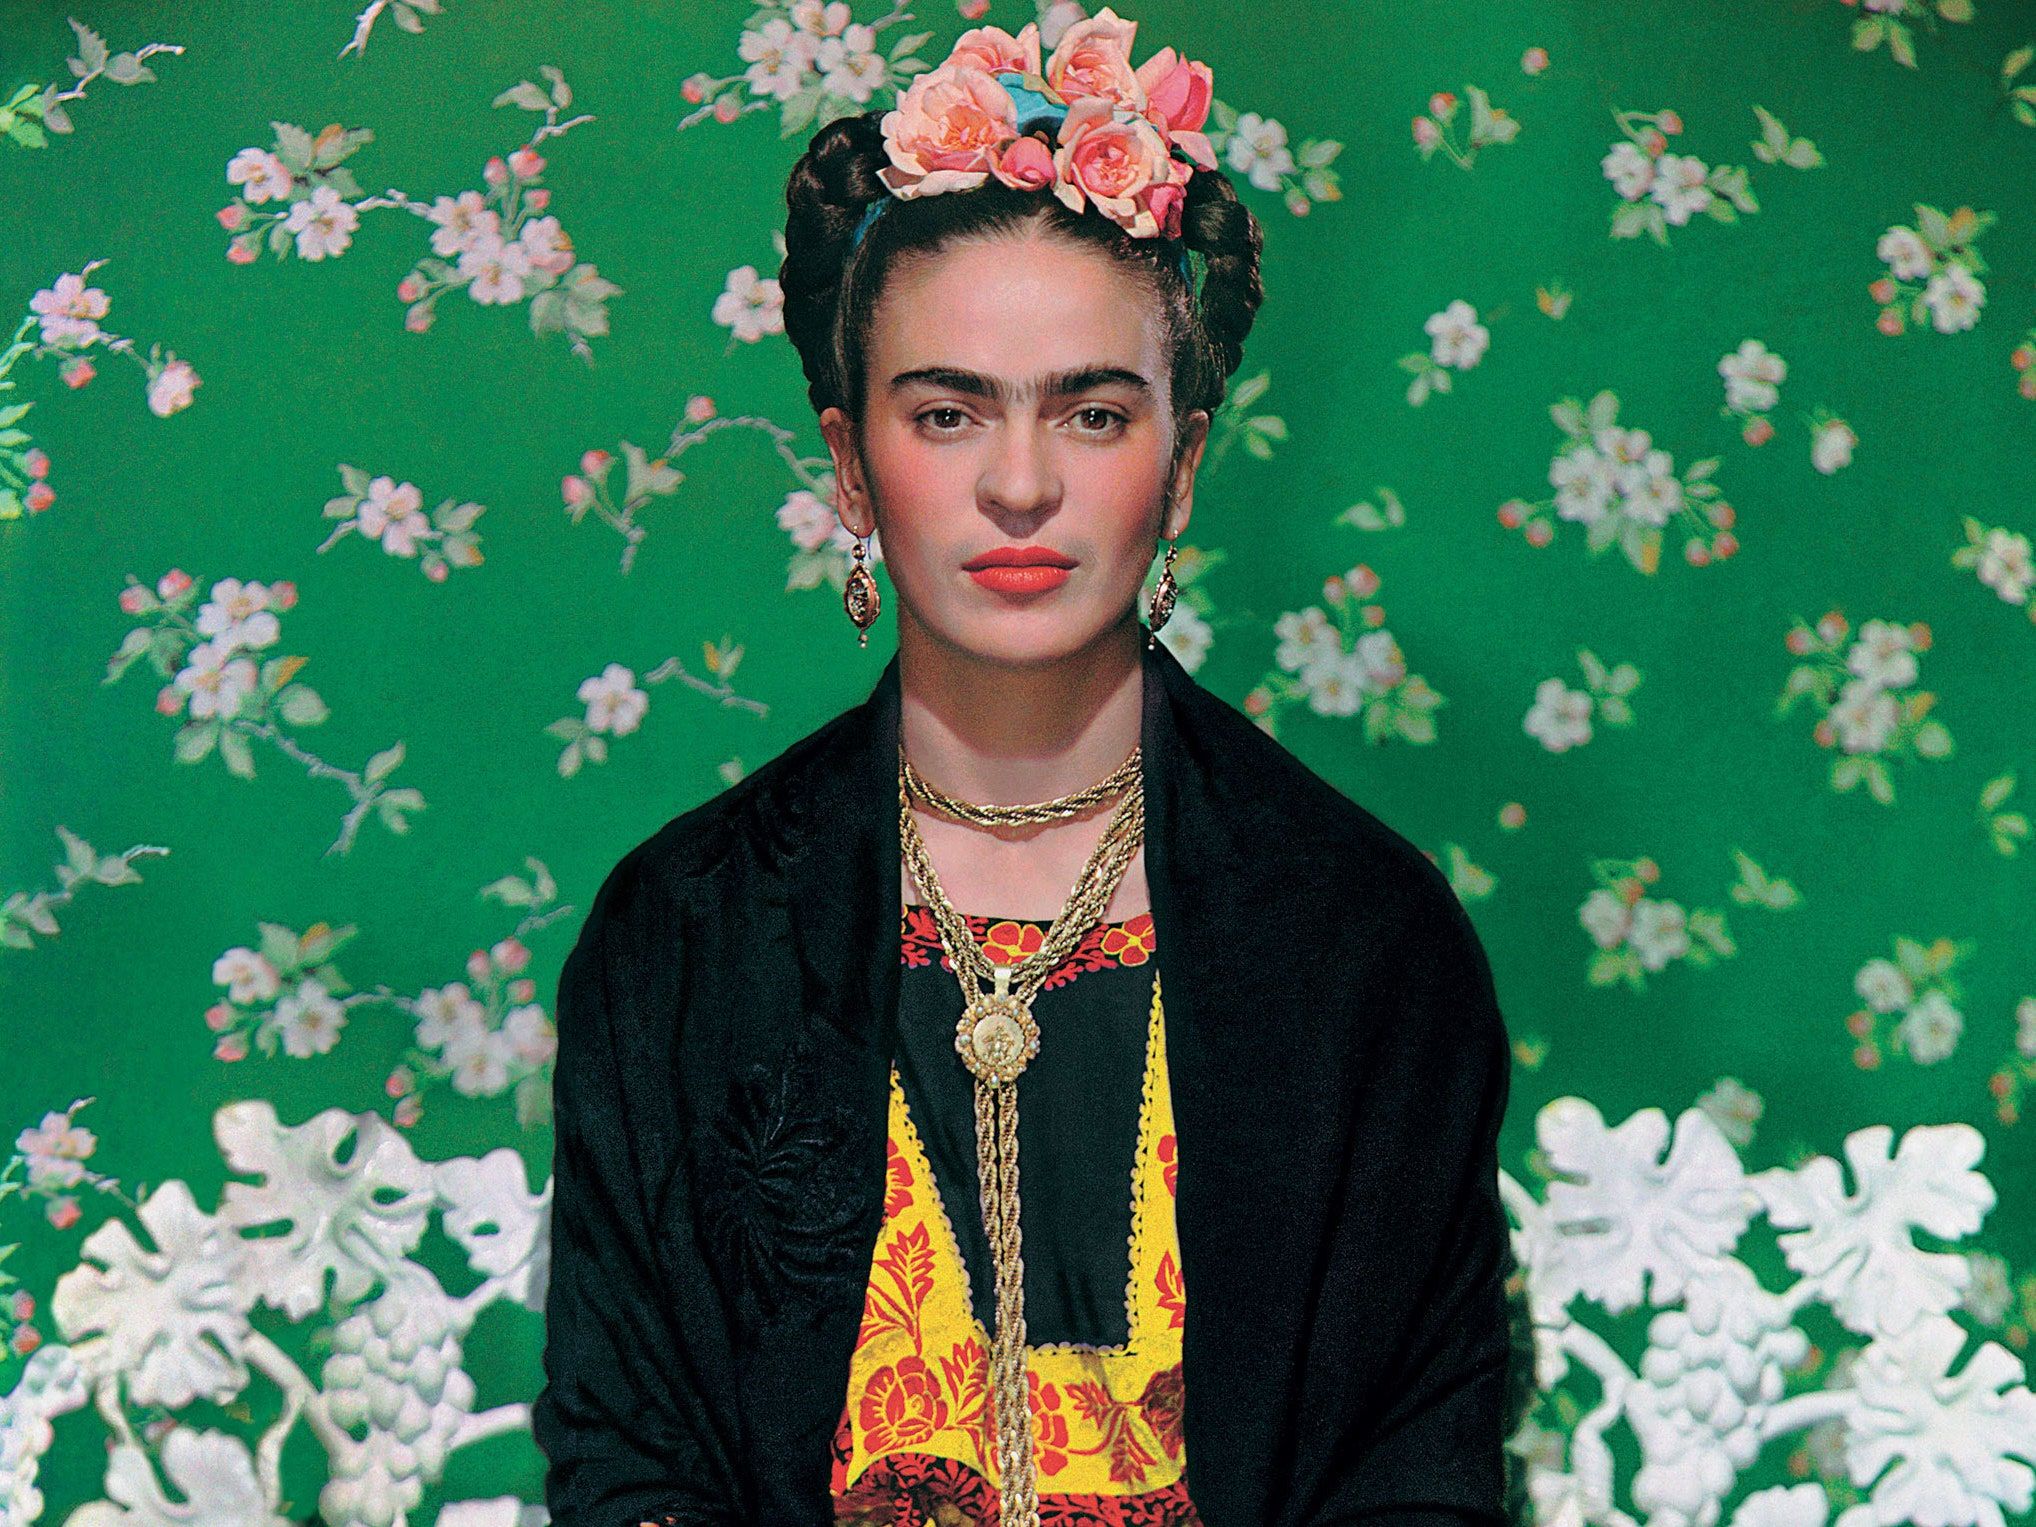 Behind the Personal Branding of Frida Kahlo